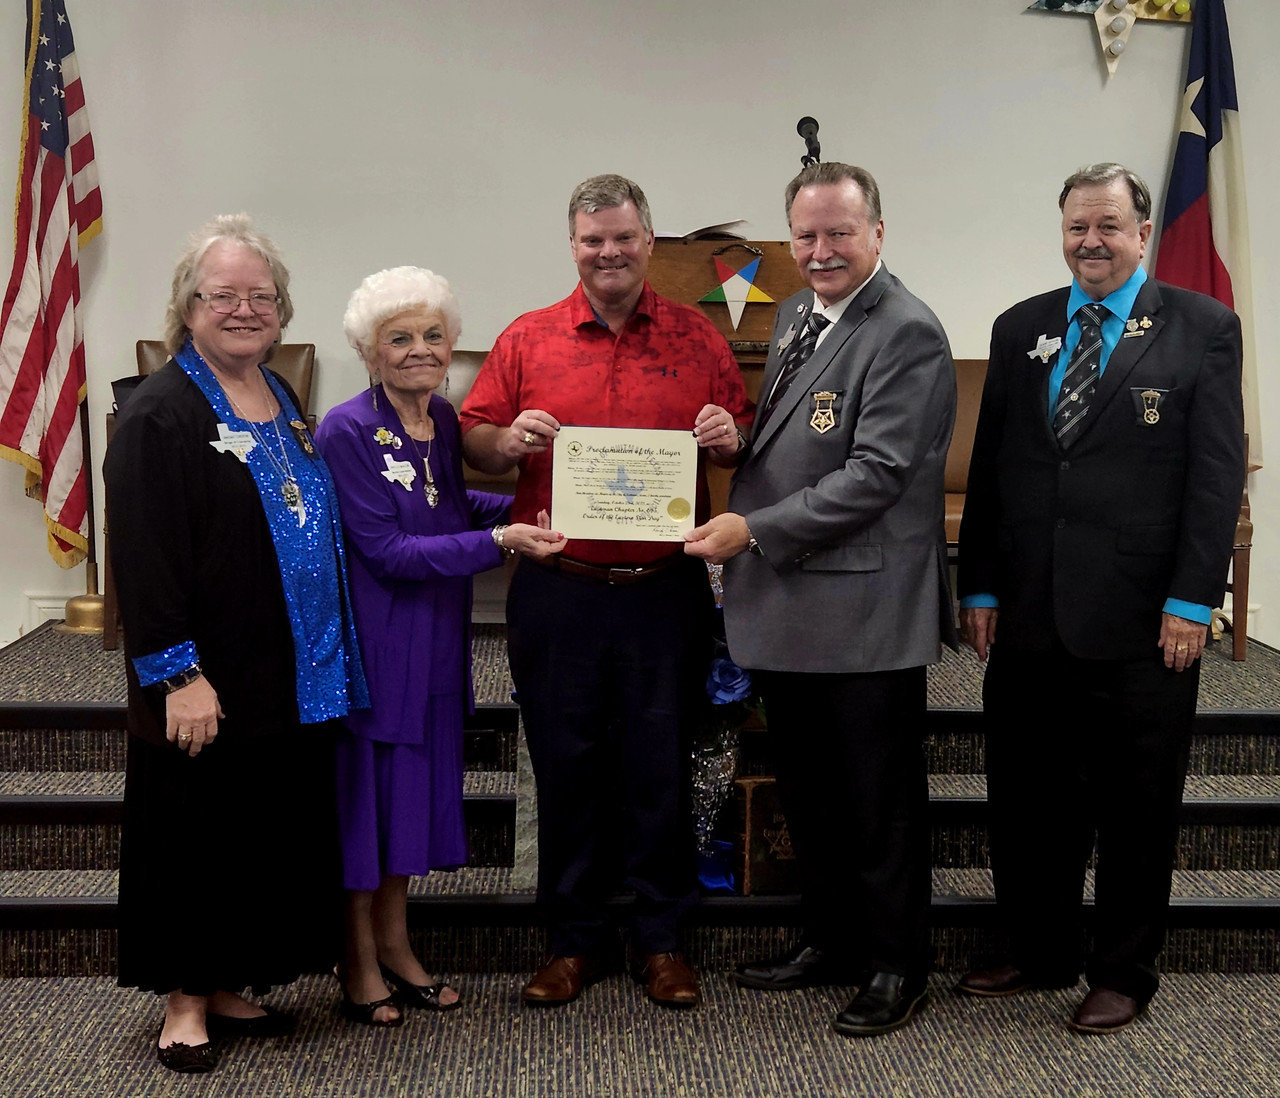 Quitman Mayor Pro Tem David Dobbs presented a proclamation that Oct. 23 is Eastern Star Day, from left, Margaret Turrentine, Worthy Matron; Phyllis Macon, Worthy Grand Matron; Dobbs; James R. Parker, Worthy Grand Patron; and Gary Dixon, Worthy Patron.